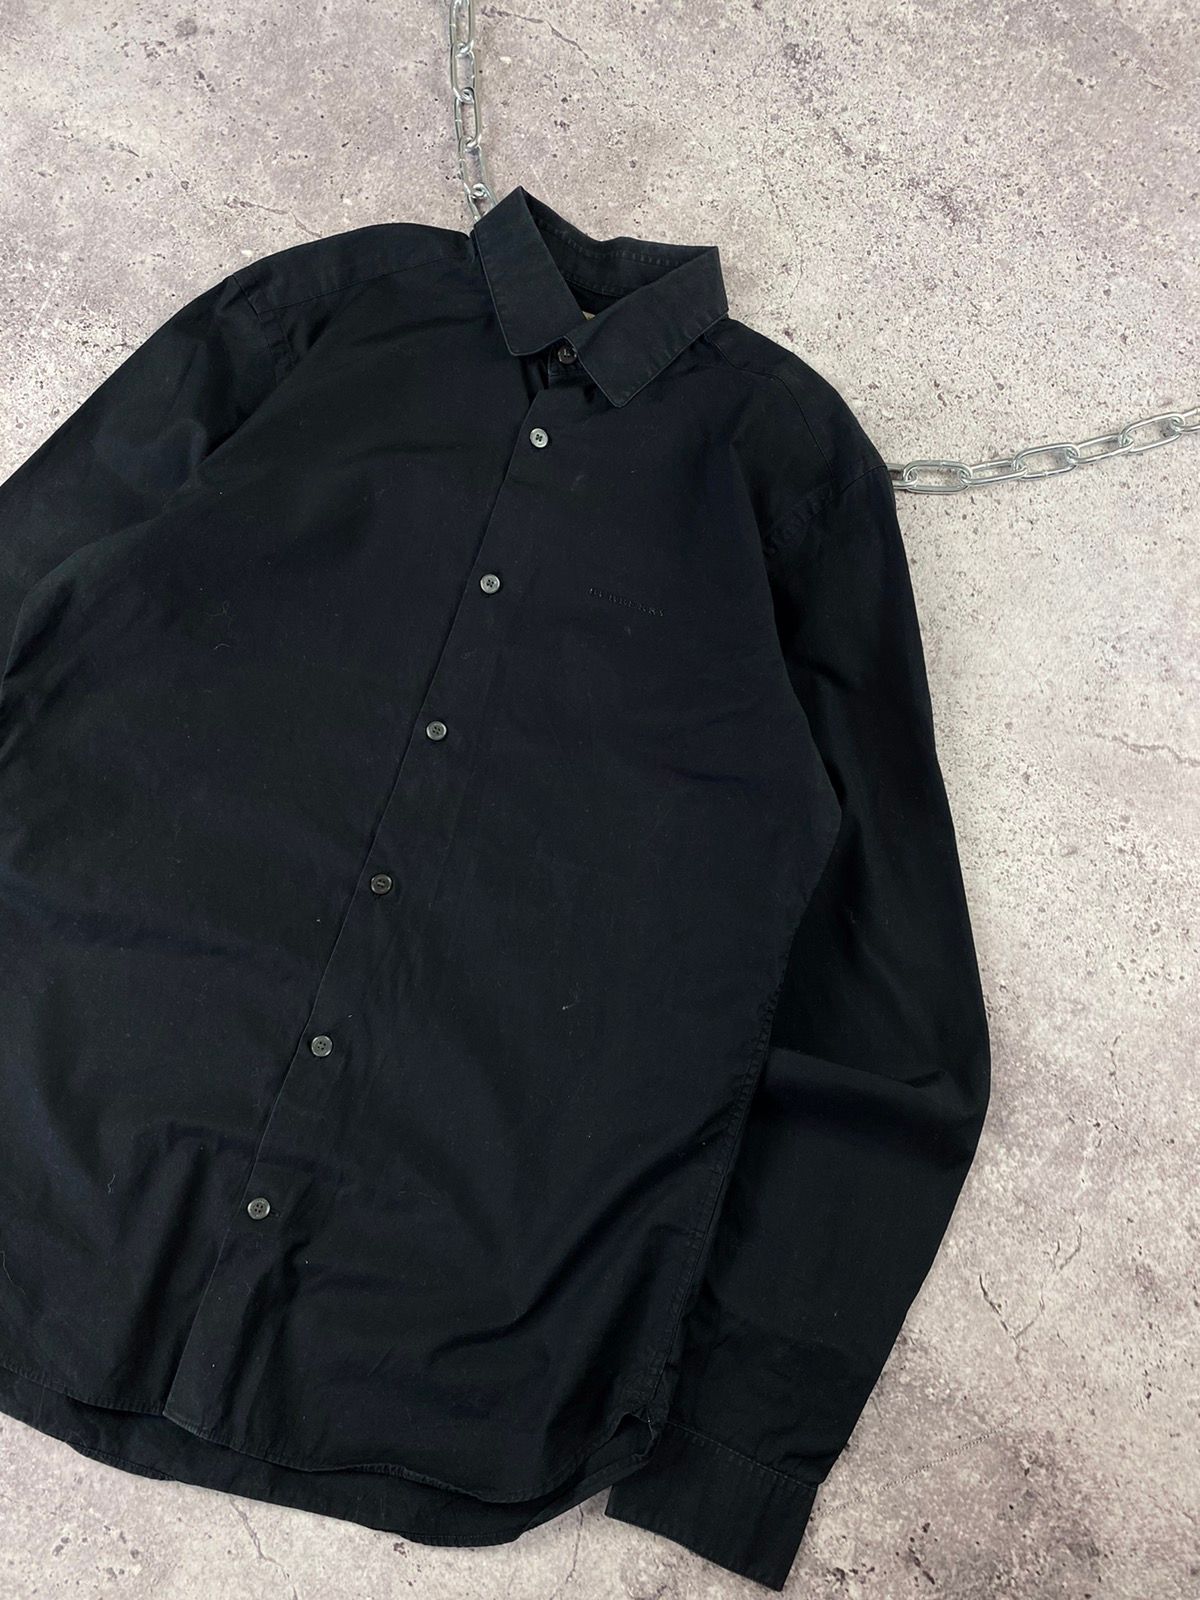 Pre-owned Burberry X Vintage Burberry Shirt M Black Classic